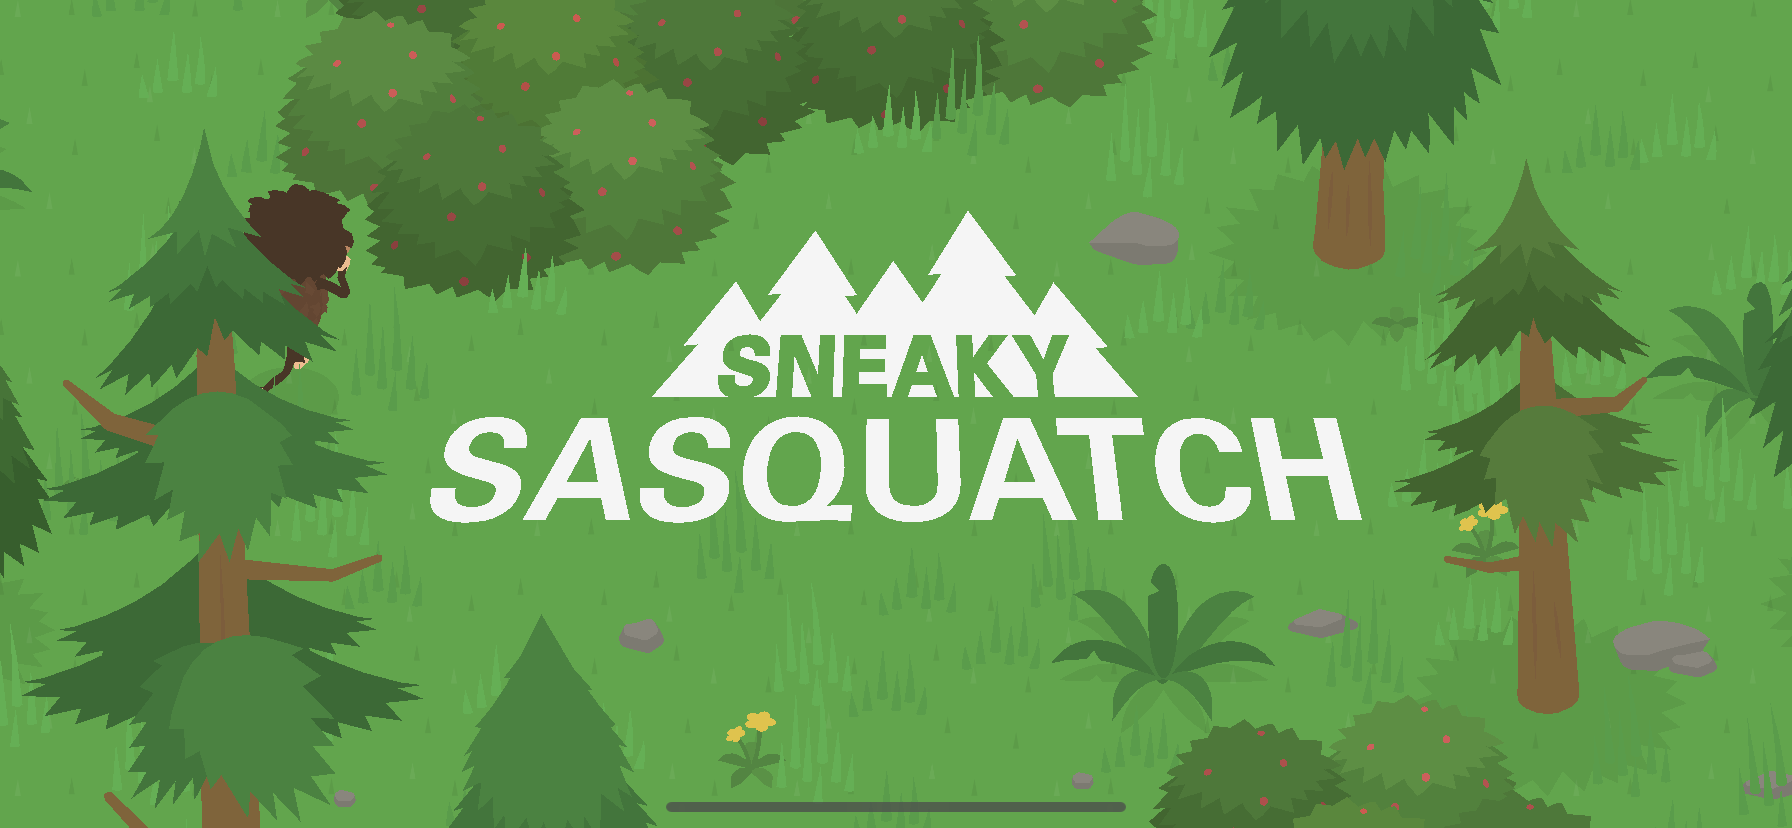 Sneaky Sasquatch Guide - An App Review